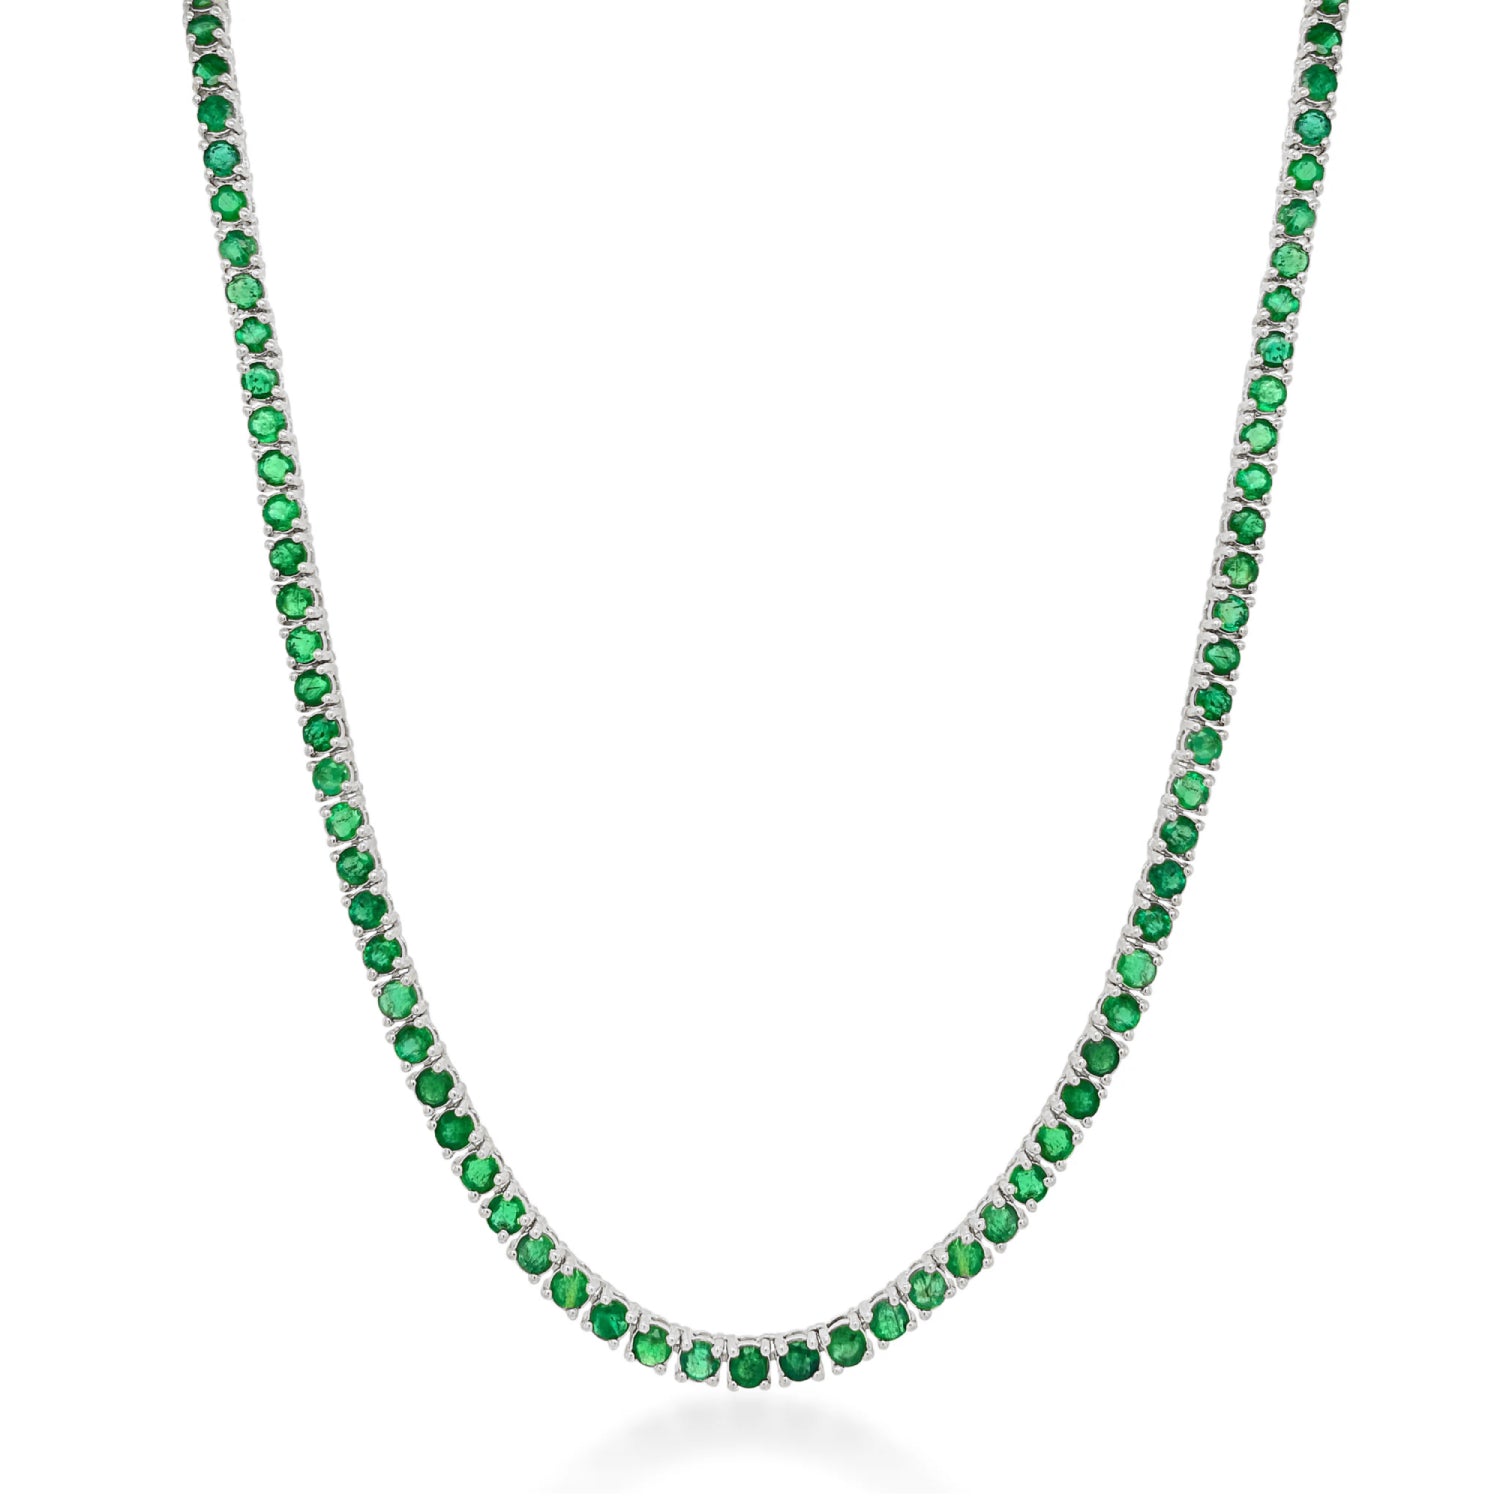 Round Cut Emerald Tennis Necklace in White Gold